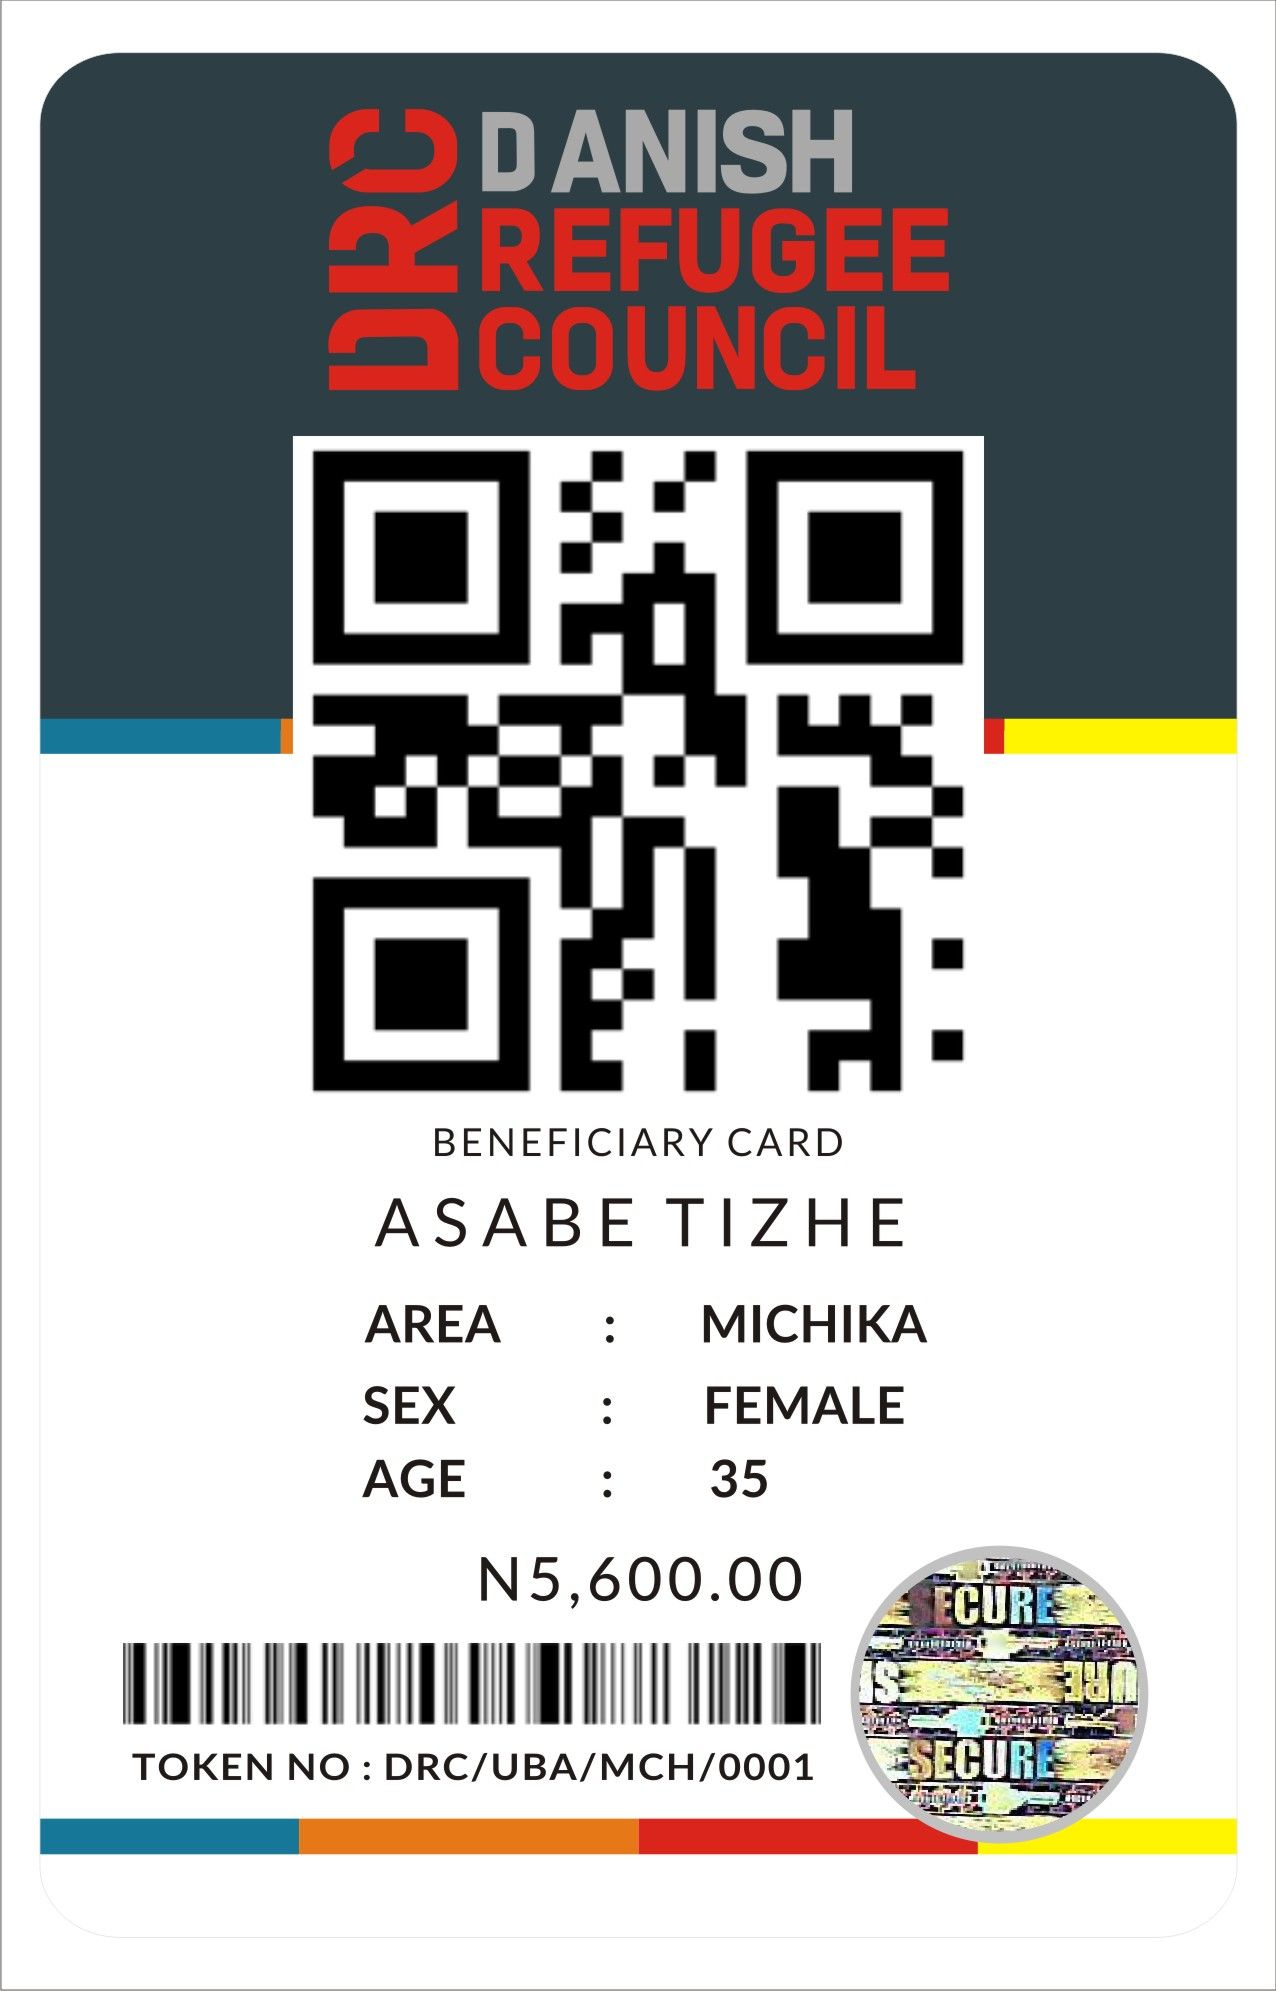 CALL EMMANUEL ON 08176499649 TO PRINT QR CODE, BAR CODE, AUTHENTICATION LABELS, SELF ADHESIVE LABELS ETC